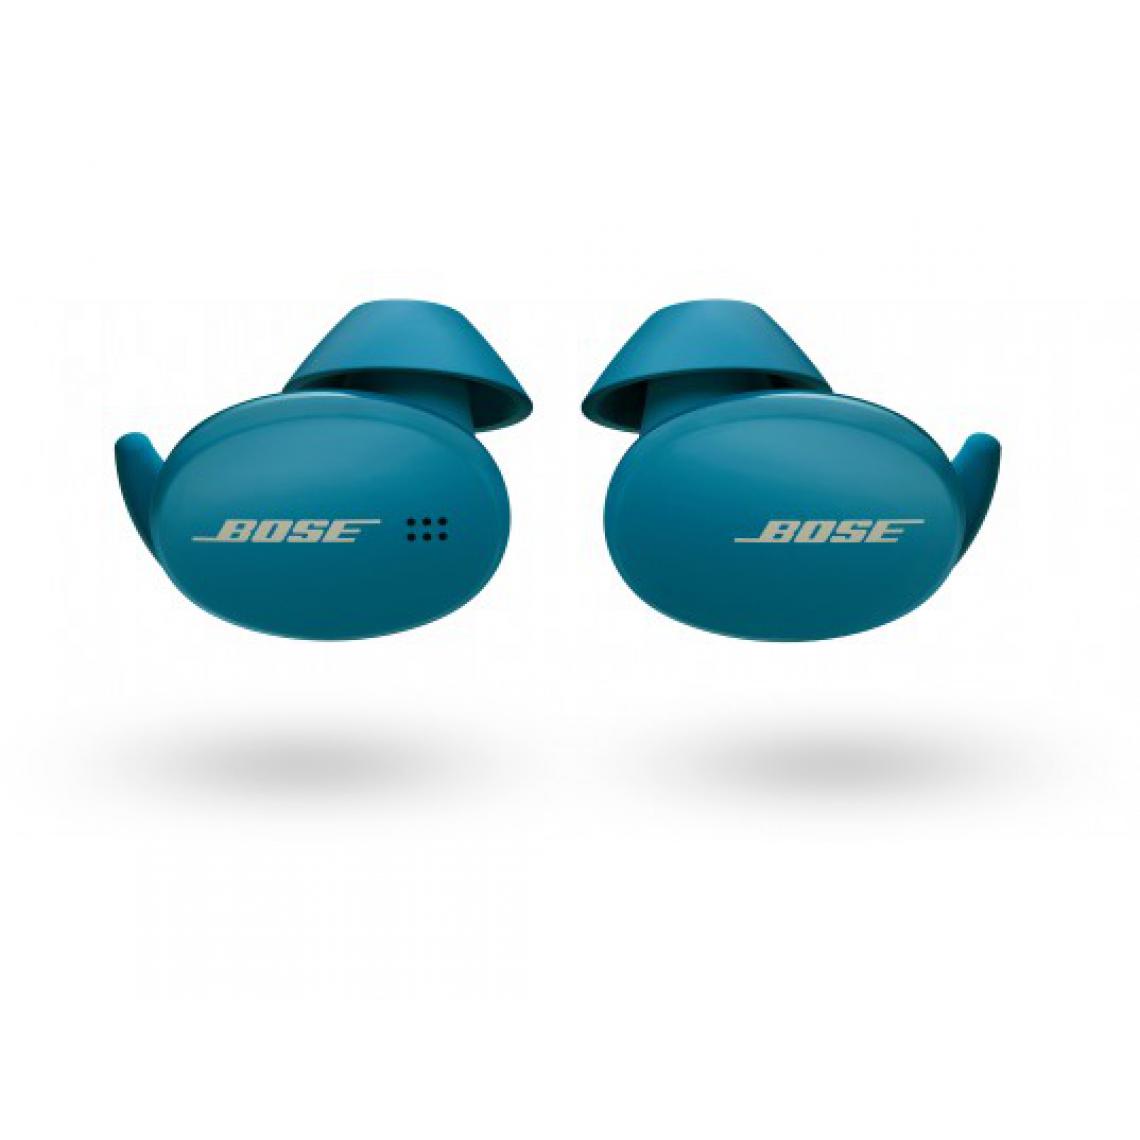 Bose - Ecouteurs True Wireless BOSE SPORT EARBUDS BALTIC BLUE - Ecouteurs intra-auriculaires